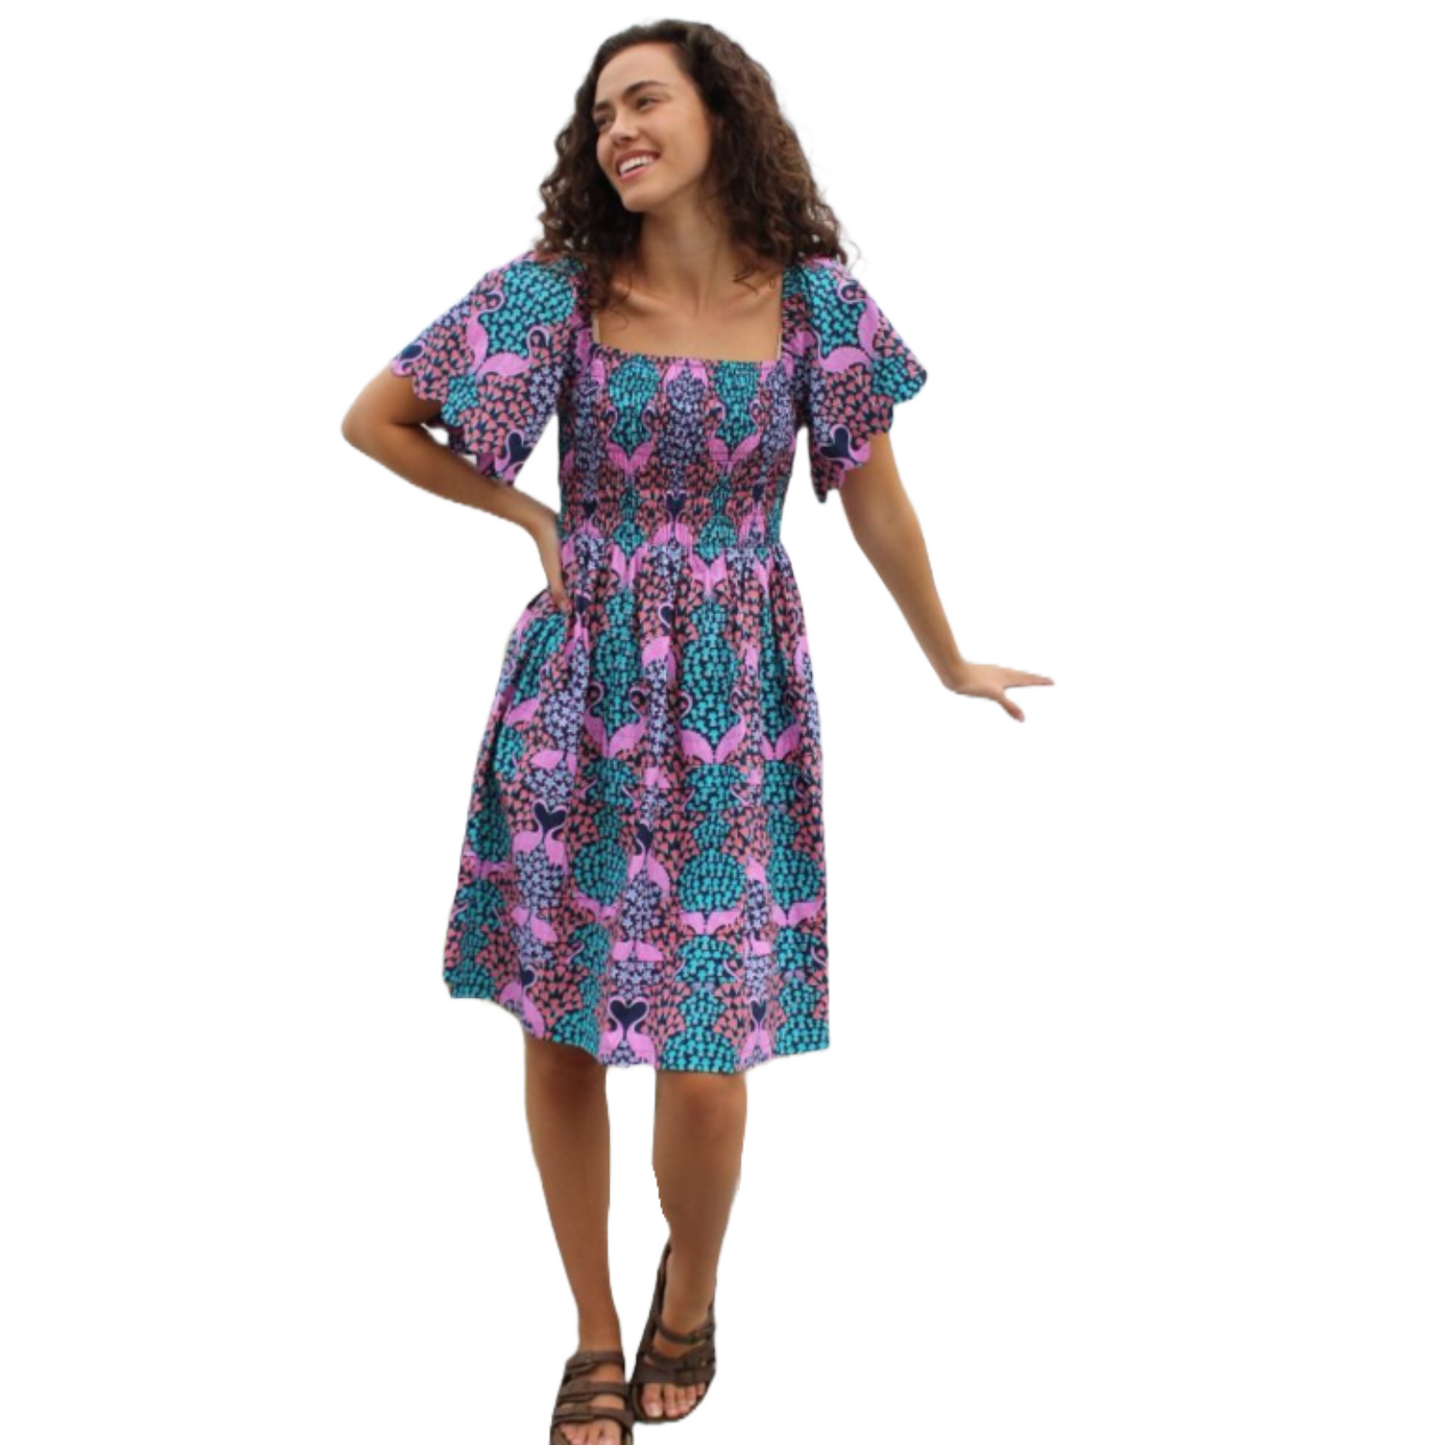 Simply Southern Ladies Tropical Patterned Scallop Dress 0124-DRS-SCLP-TROP